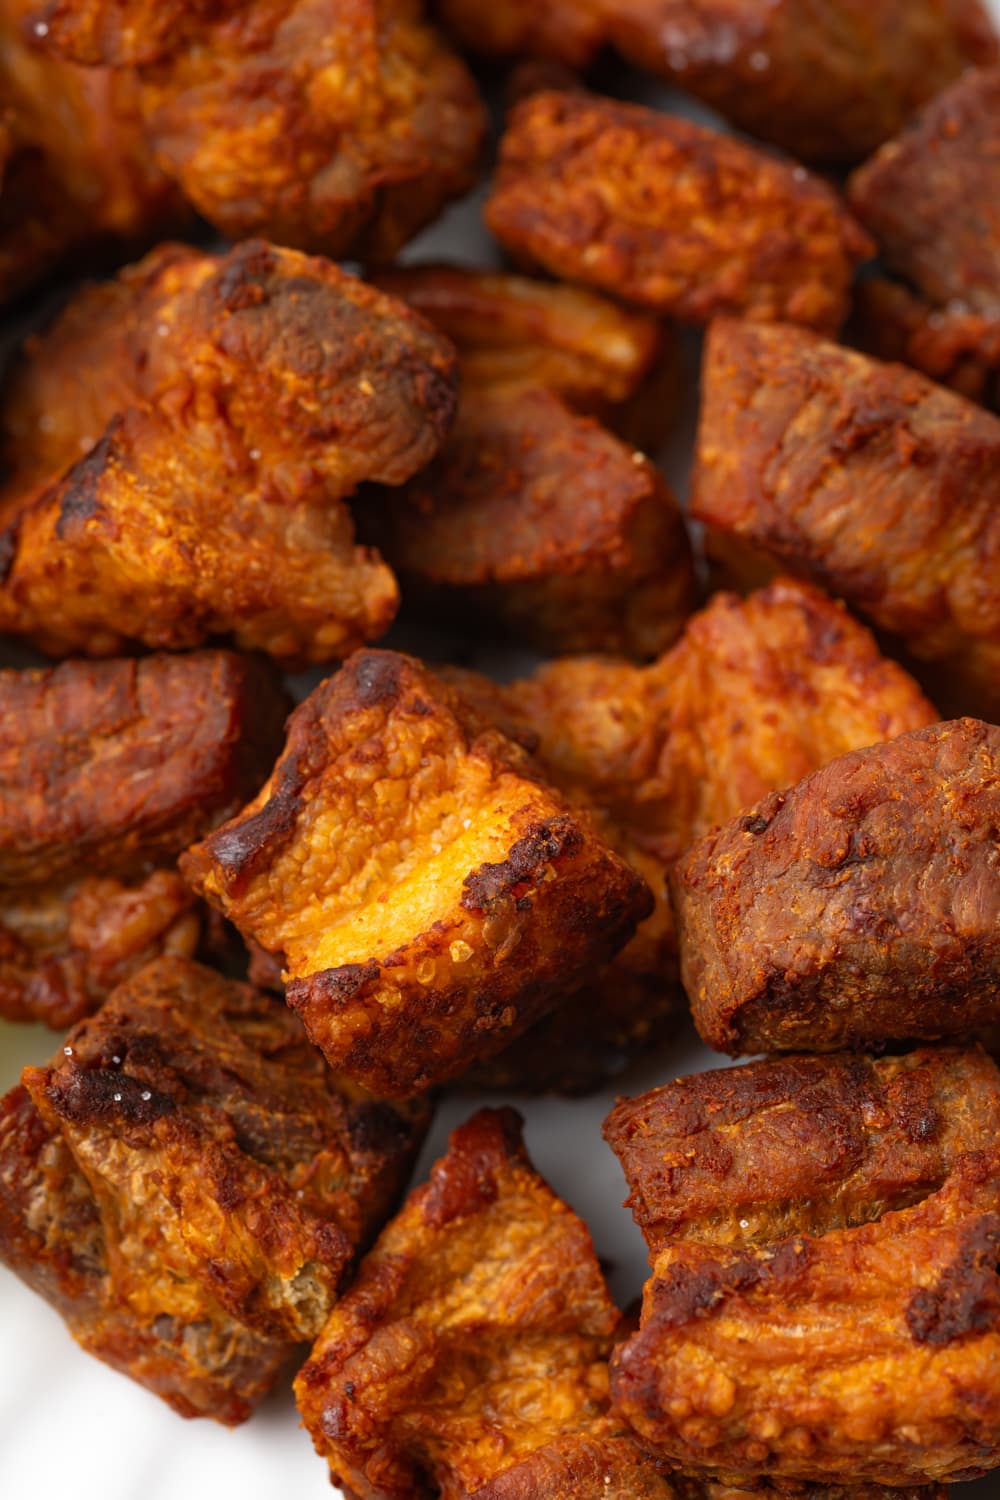 A close up of chicharrones de puerco showing all the details of the crispiness.